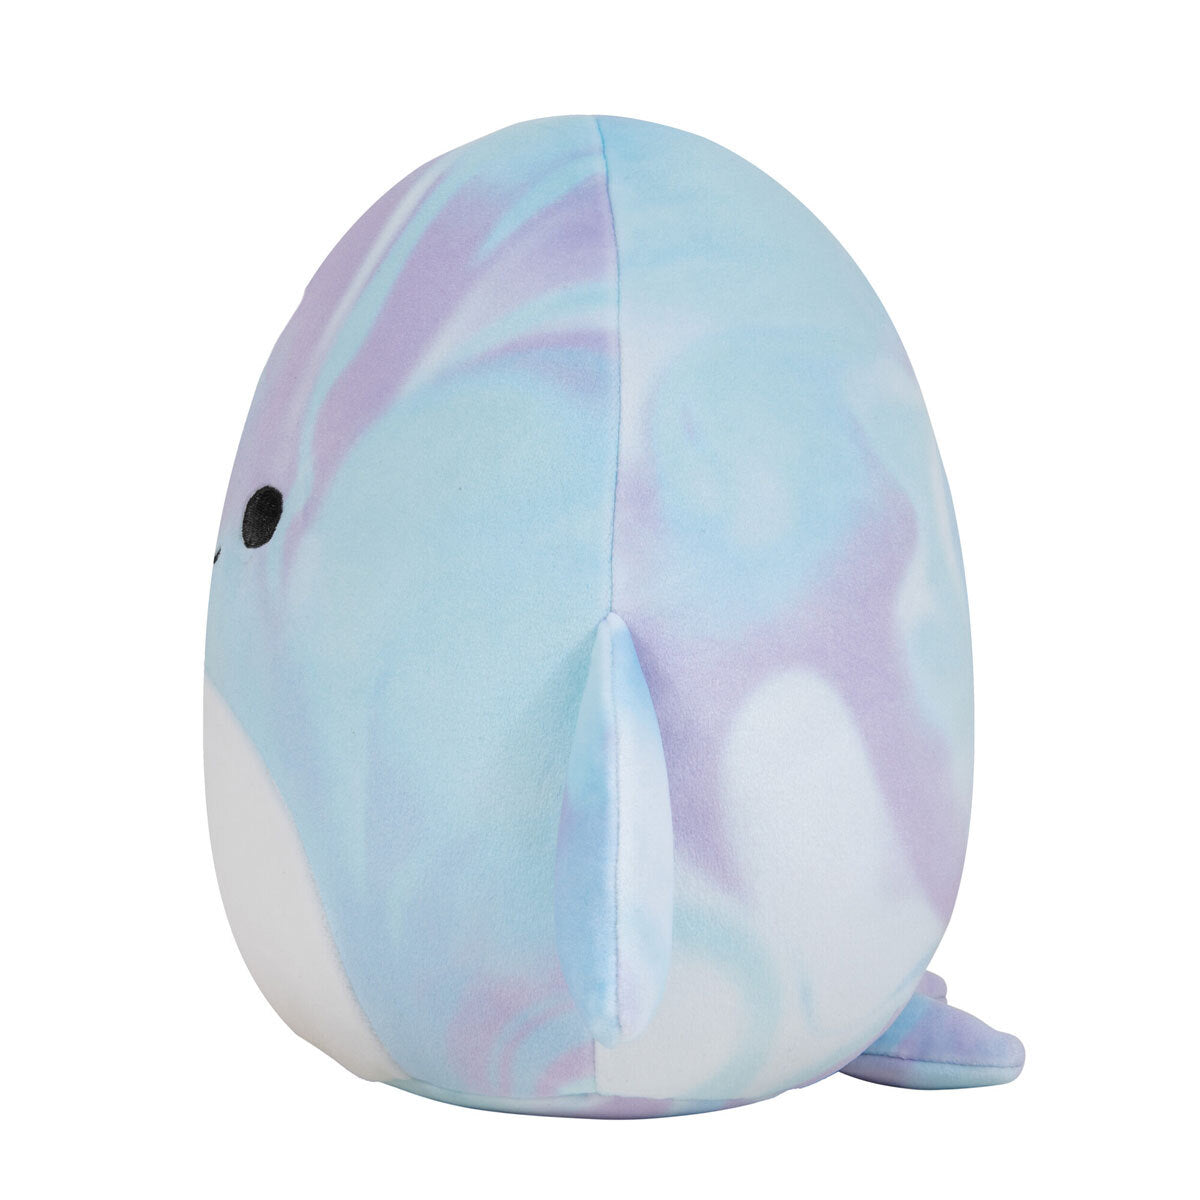 Squishmallows 7.5' Soft Toy - Laslow the Beluga Whale